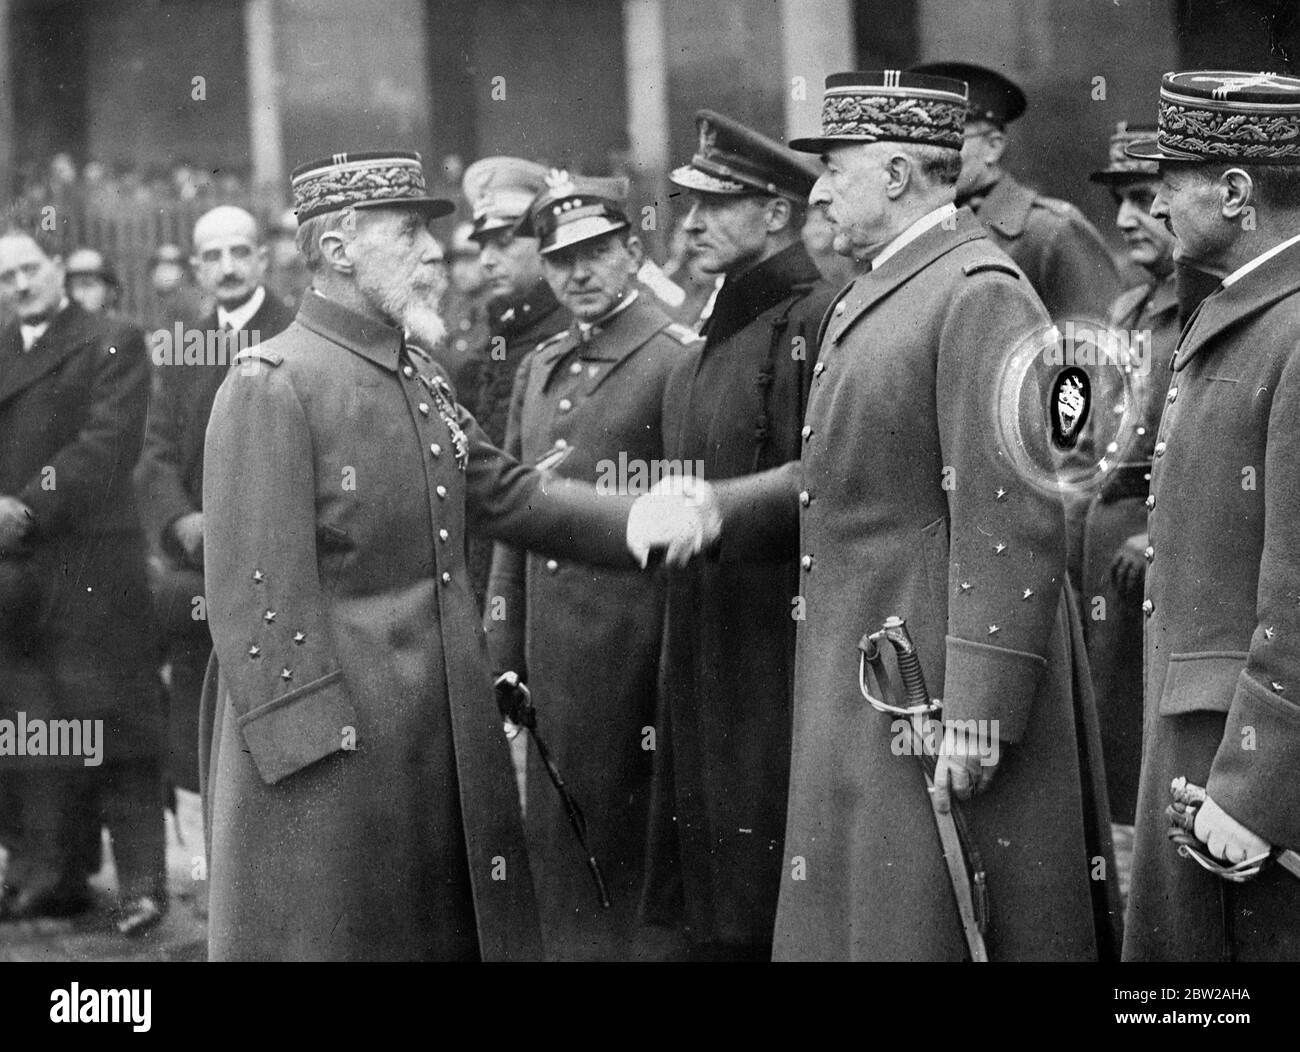 General Gouraud hands over military Governorship of Paris to his successor. After 50 years of service in the French Army, Gen Henry Gouraud, Military Governor of Paris, has retired, having reached the age limit. General Gouraud took part in a farewell ceremony in the courtyard of the Invalides, his headquarters during the long period, he commanded the armed forces in and around Paris, when he handed over his post to his successor, General Billotte. General Gouraud lost his arm on 30 June 1915, when visiting wounded men. Altogether he was wounded five times. Photos show, General Gouraud , shaki Stock Photo